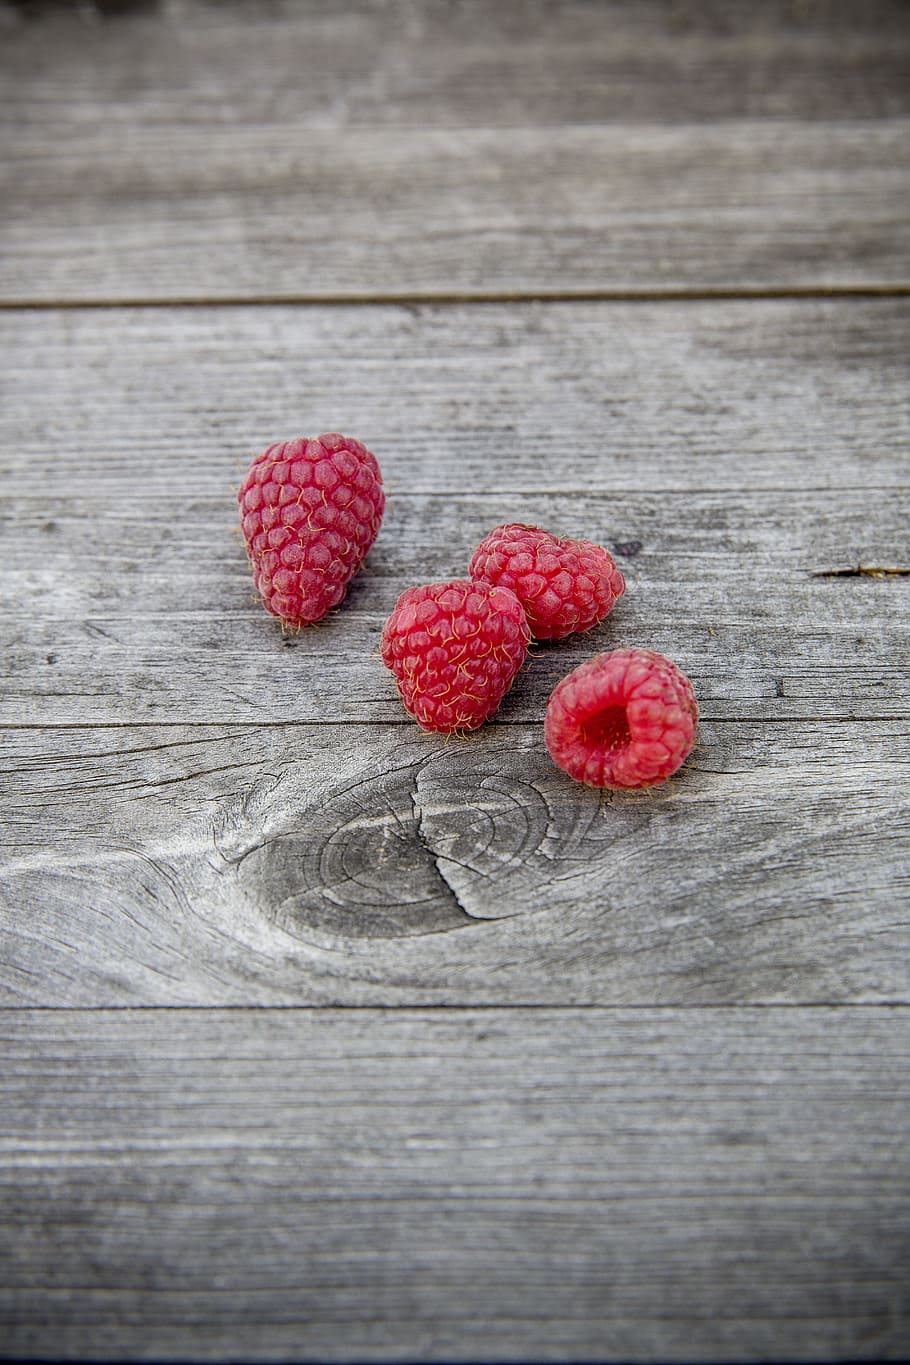 four red raspberries, raspberries, fruit, fruits, delicious, food, nutrition, red, frisch, eat